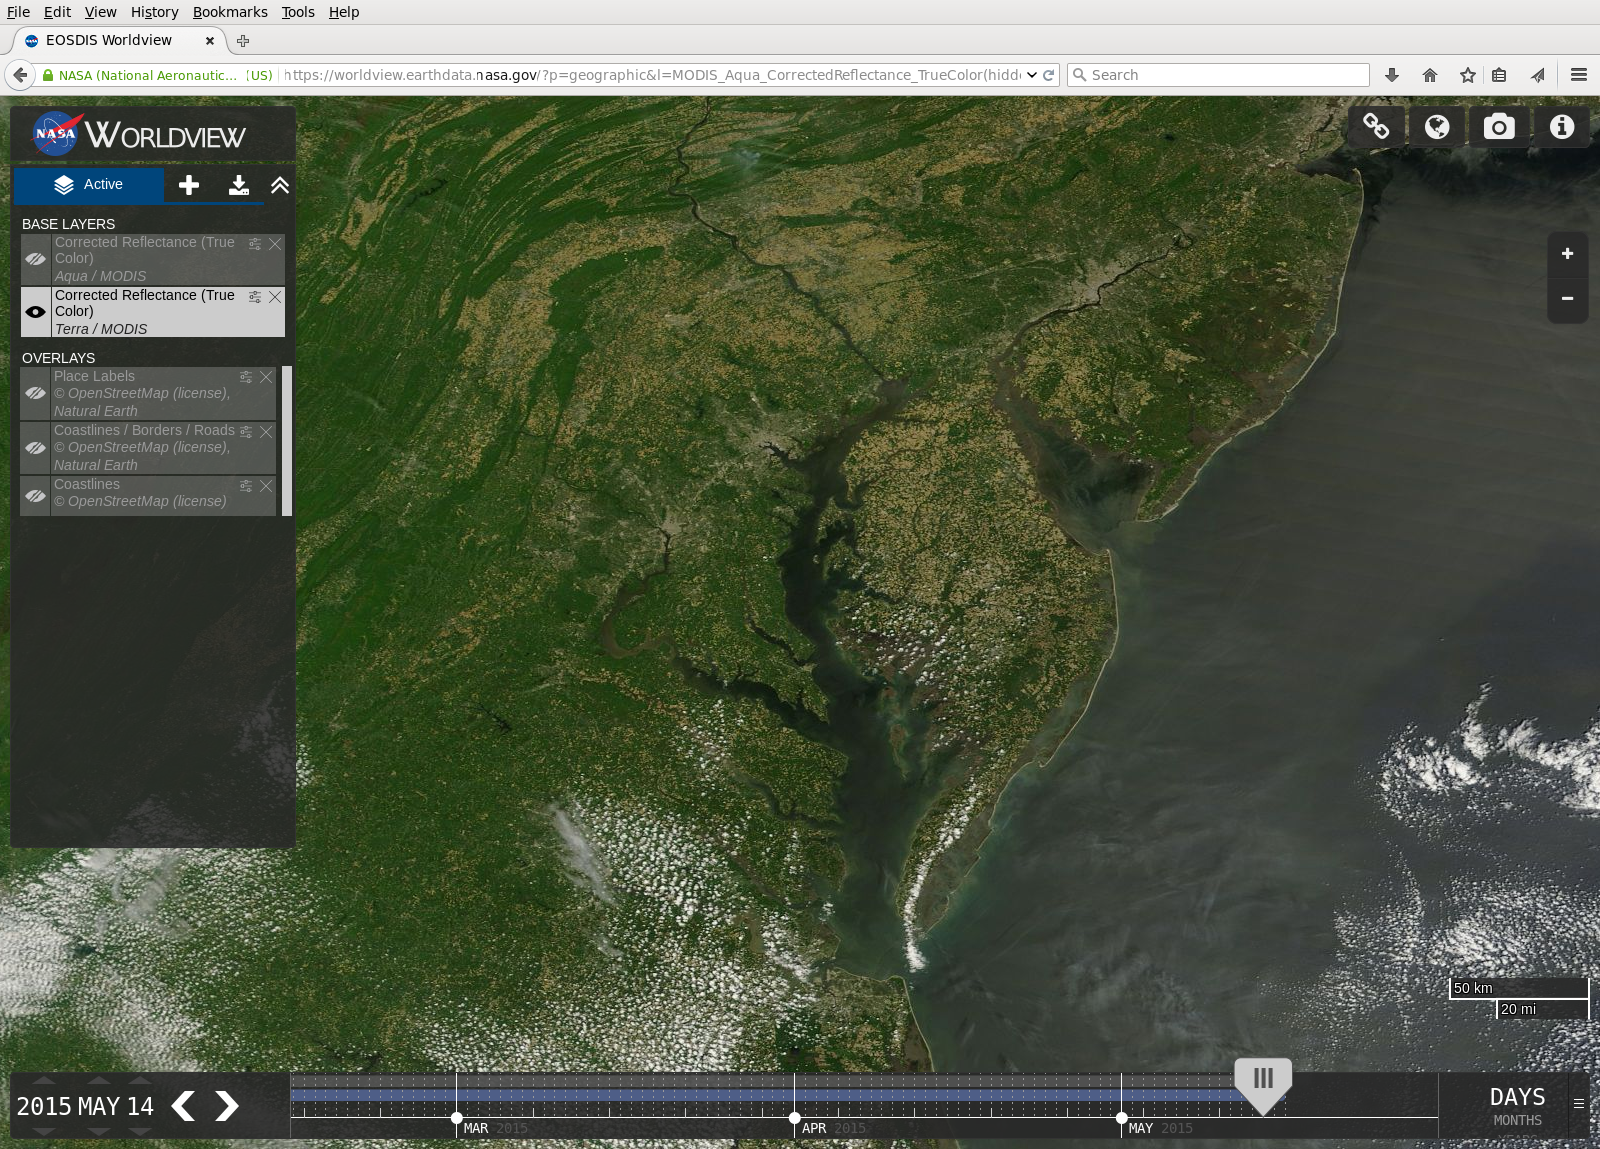 NASA's Worldview web page zoomed to the region around Goddard Space Flight Center